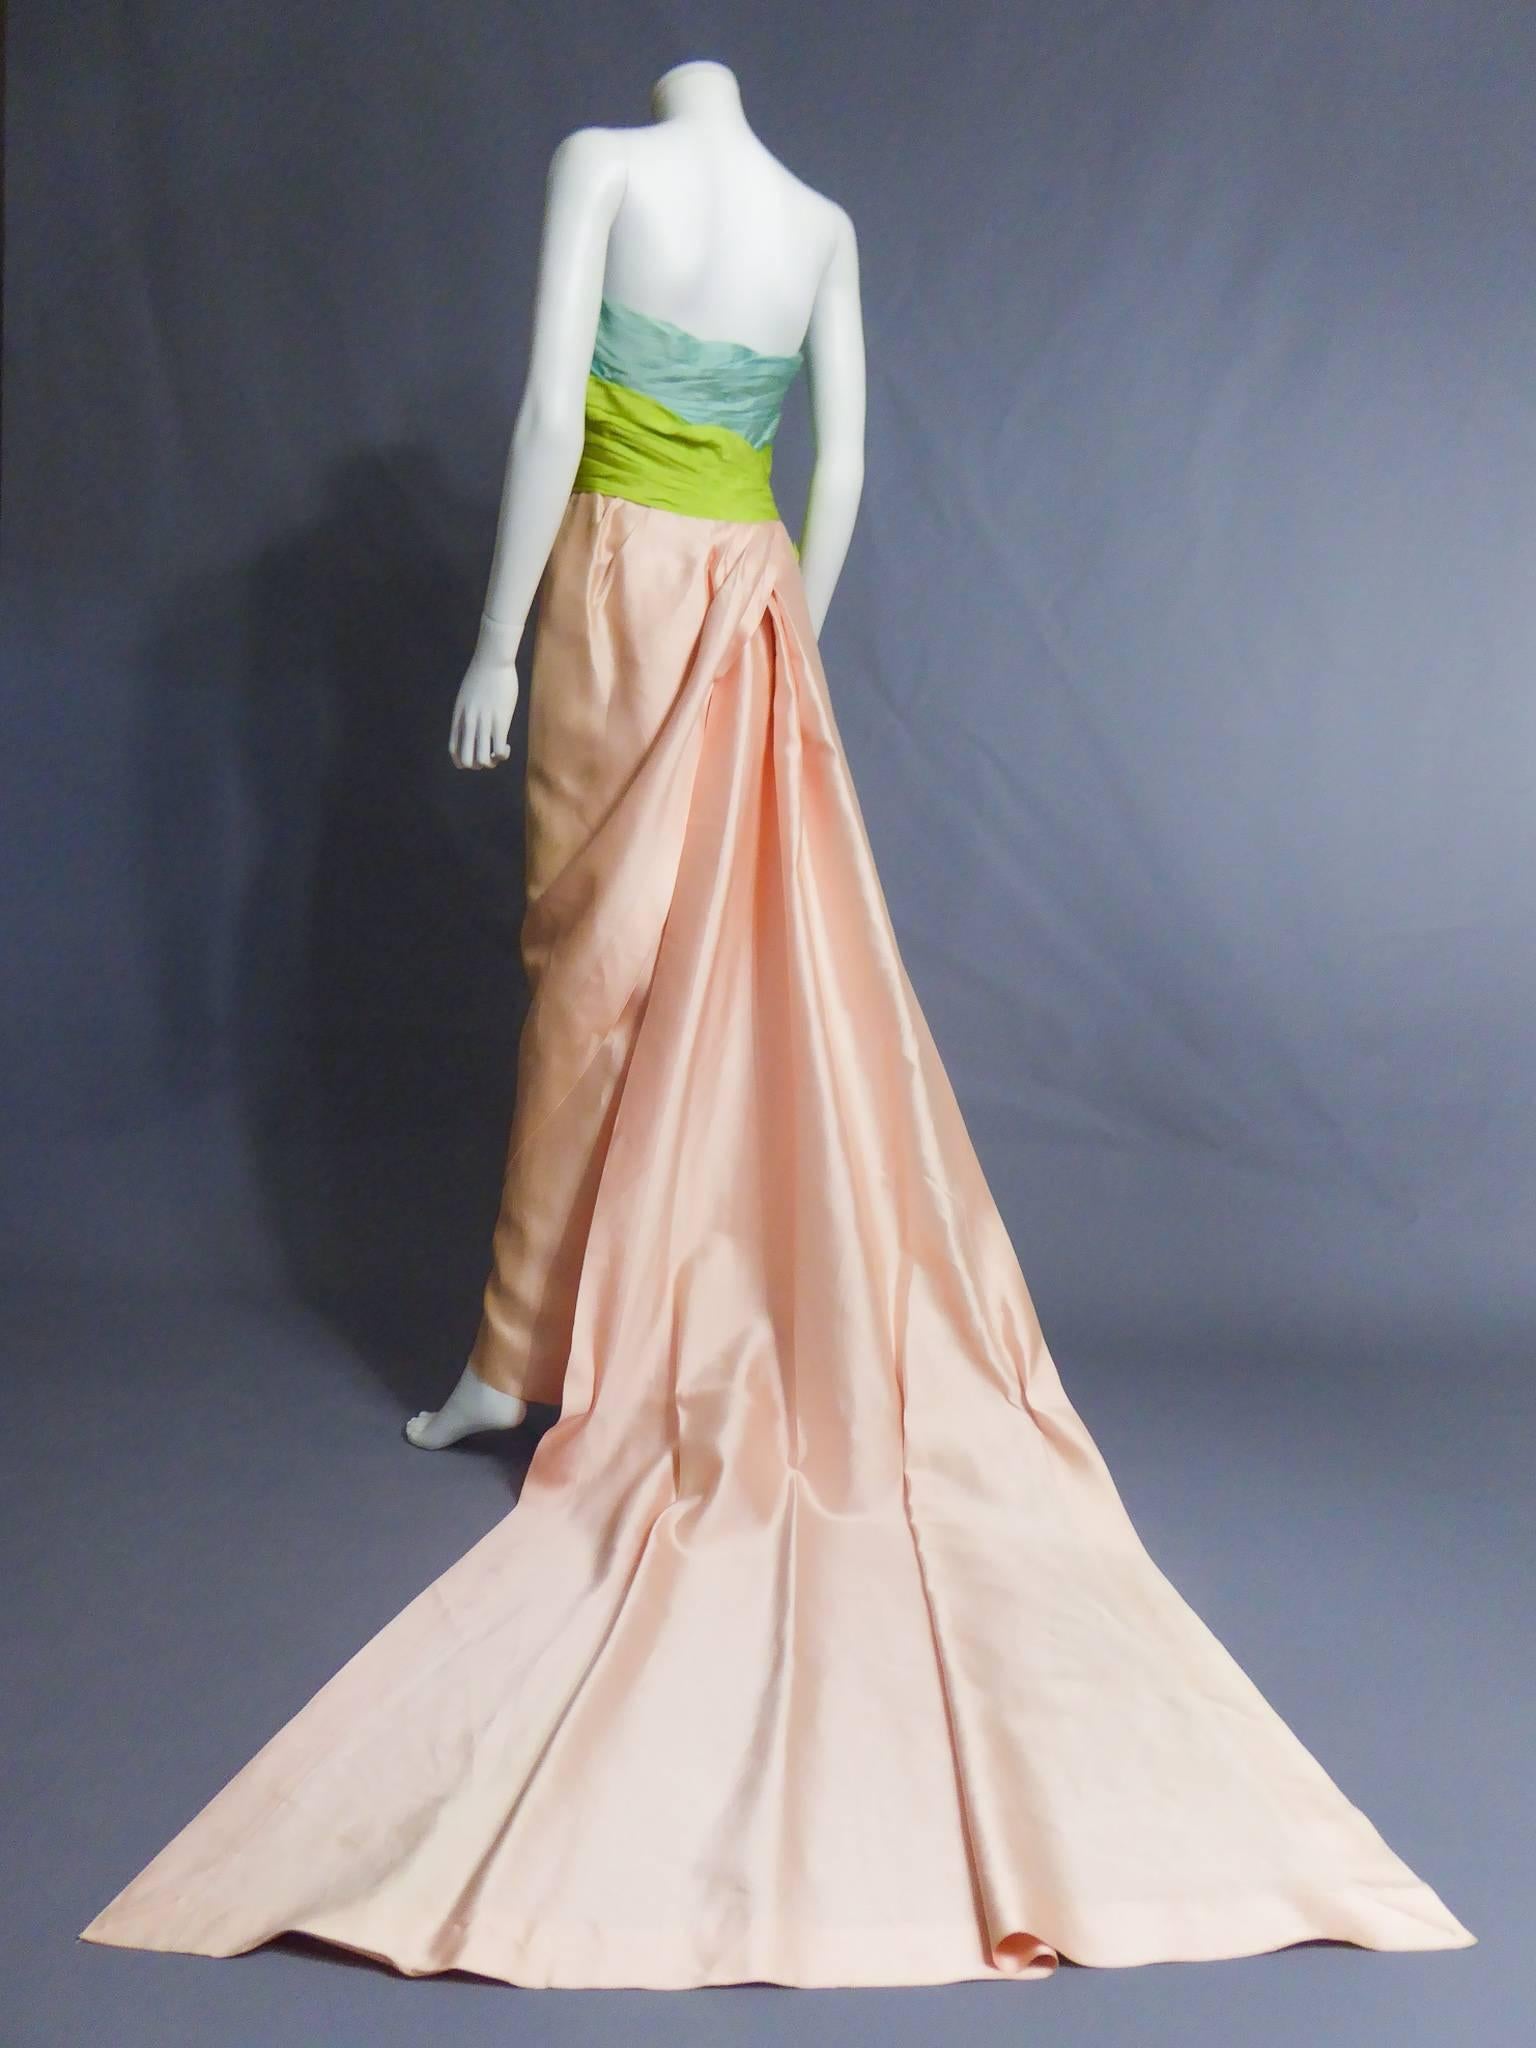 Circa 1990

Paris, France

Strapless Haute Couture evening gown with long satin train. Bustier draped with a millefeuille of blue and green silk taffetas, closing with snaps fasteners. Long sewn twill silk tube skirt with an opening over the ankles